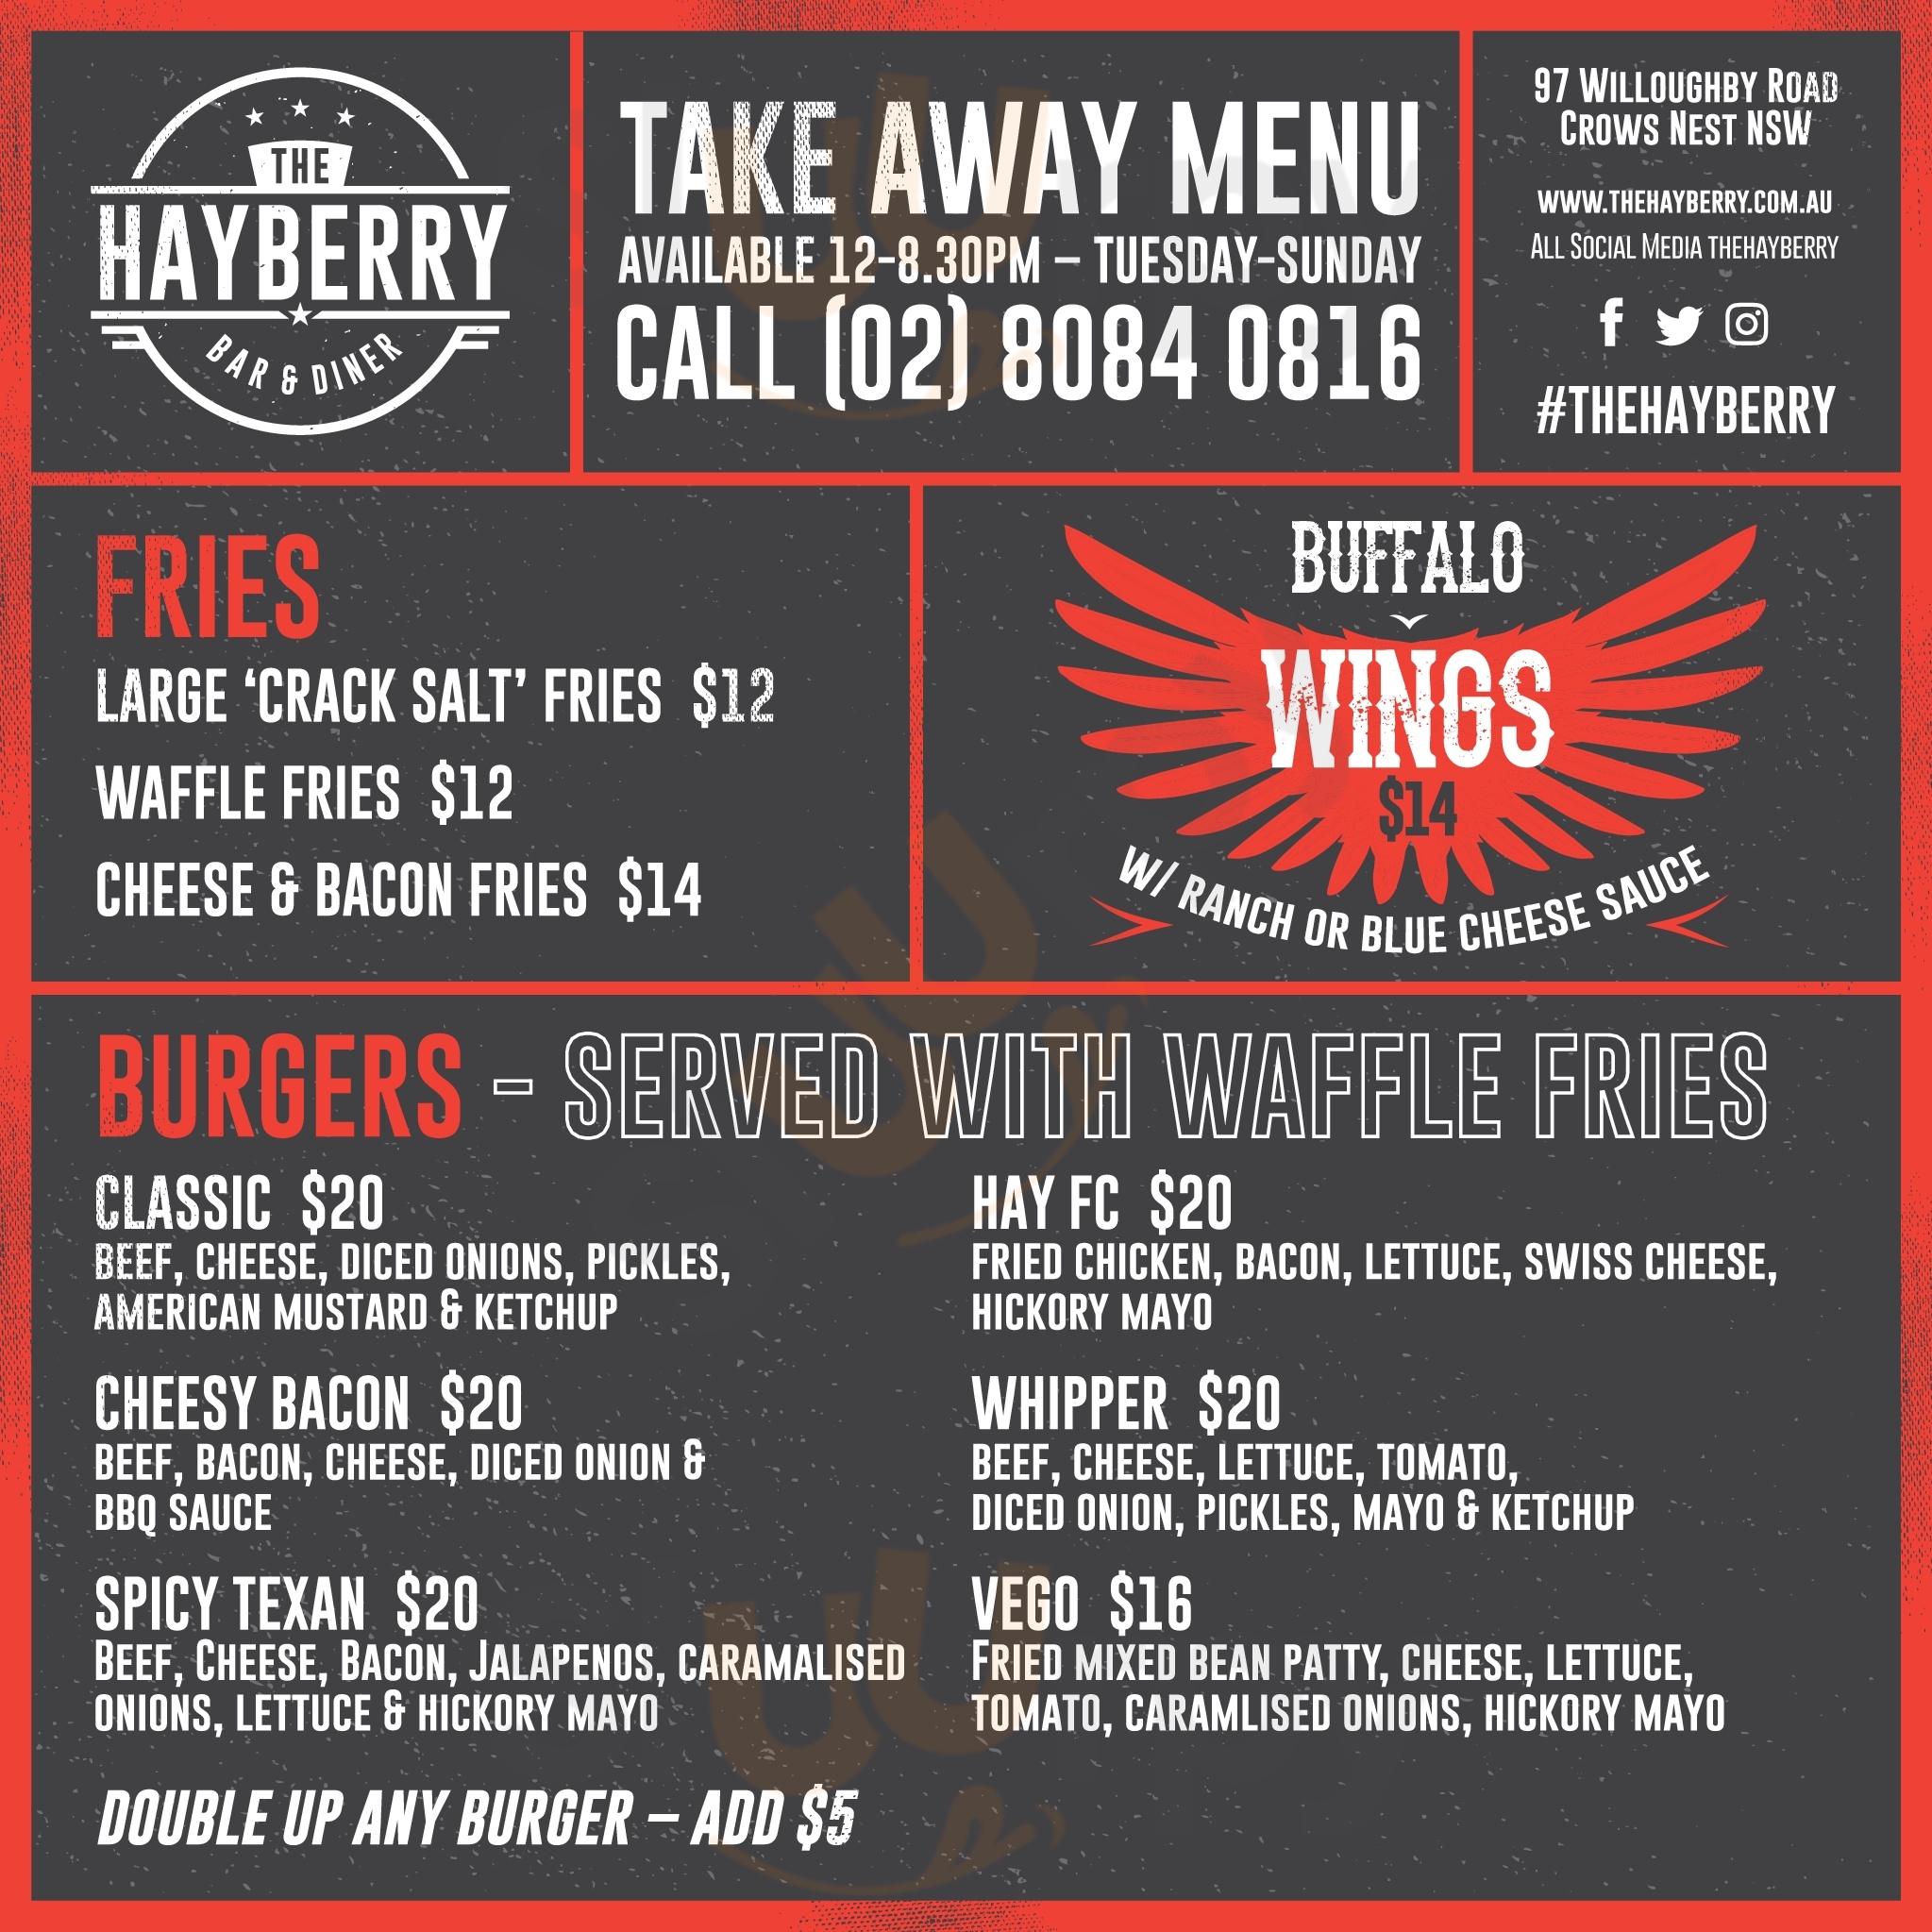 The Hayberry Crows Nest Menu - 1